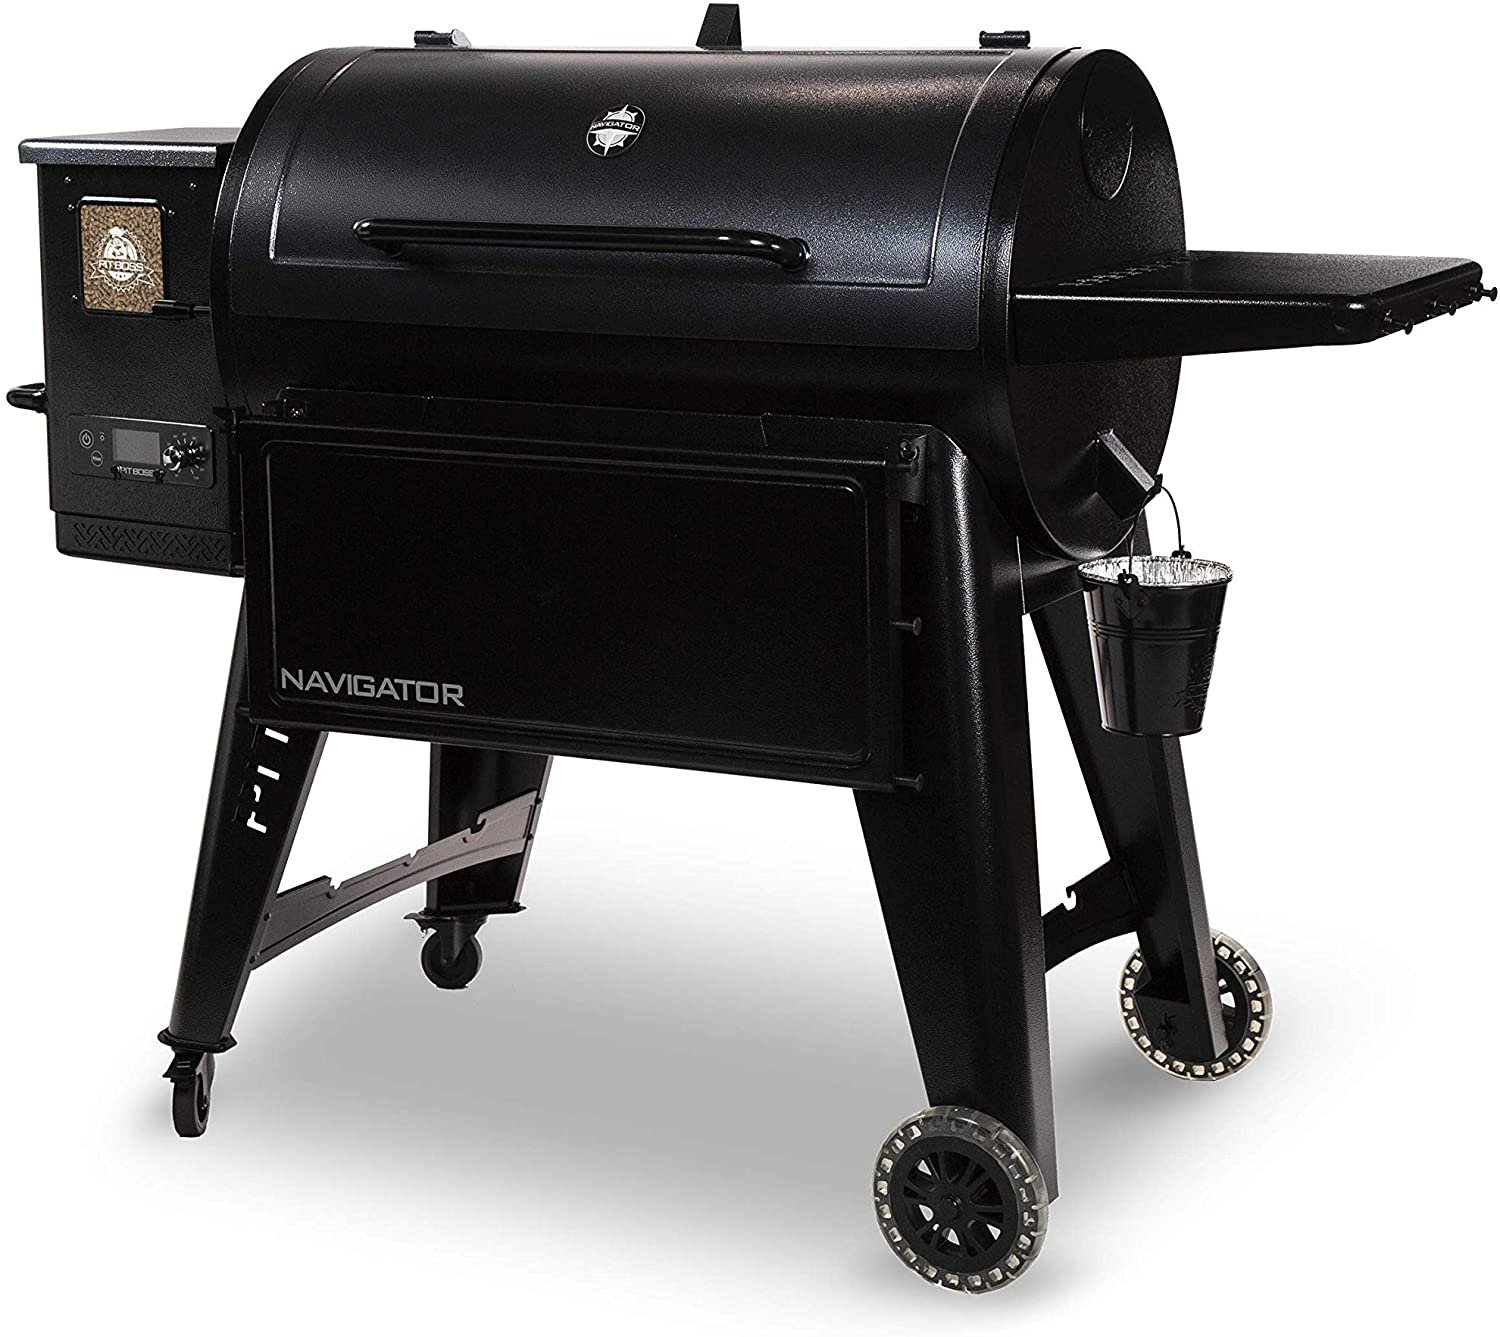 Pit Boss 1150 Wood Pellet Grill with Cover - image 3 of 8